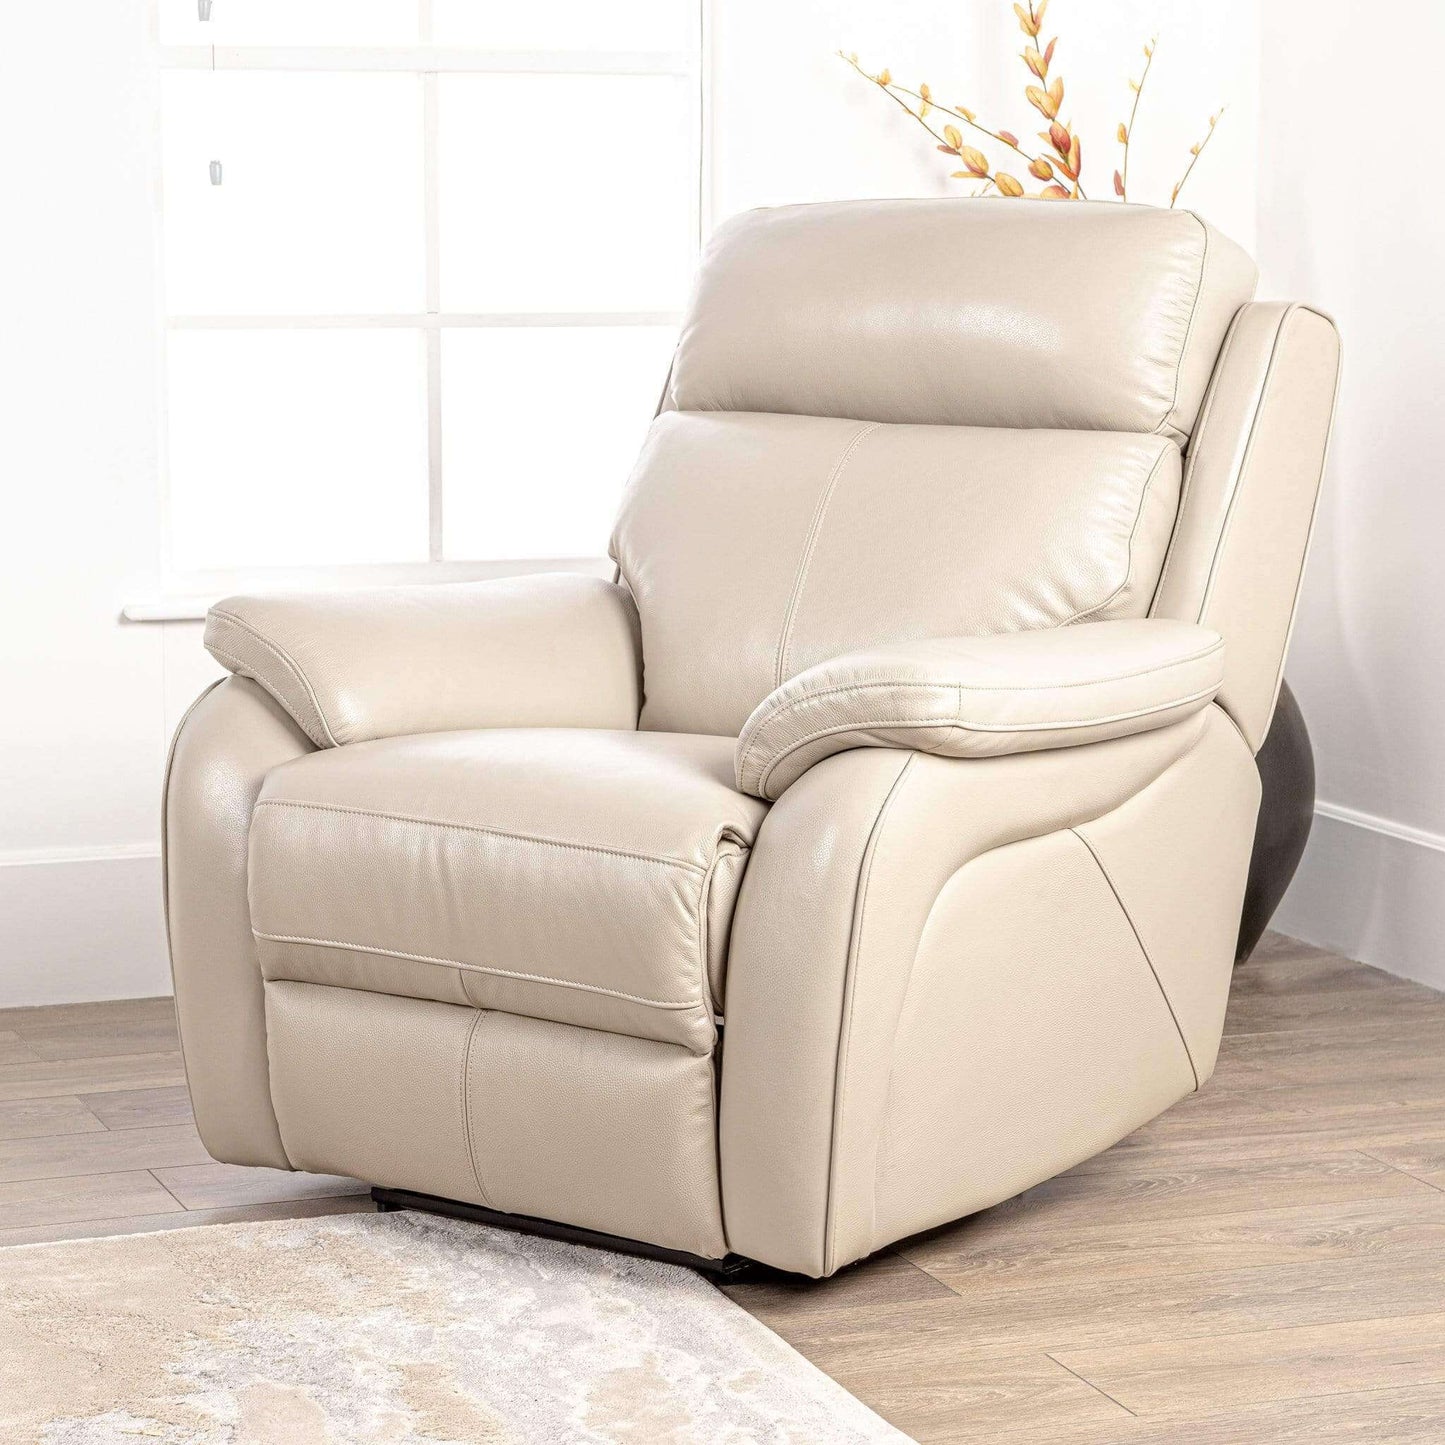 Furniture  -  Comfort King Quincy Electric Reclining Armchair  -  50153206